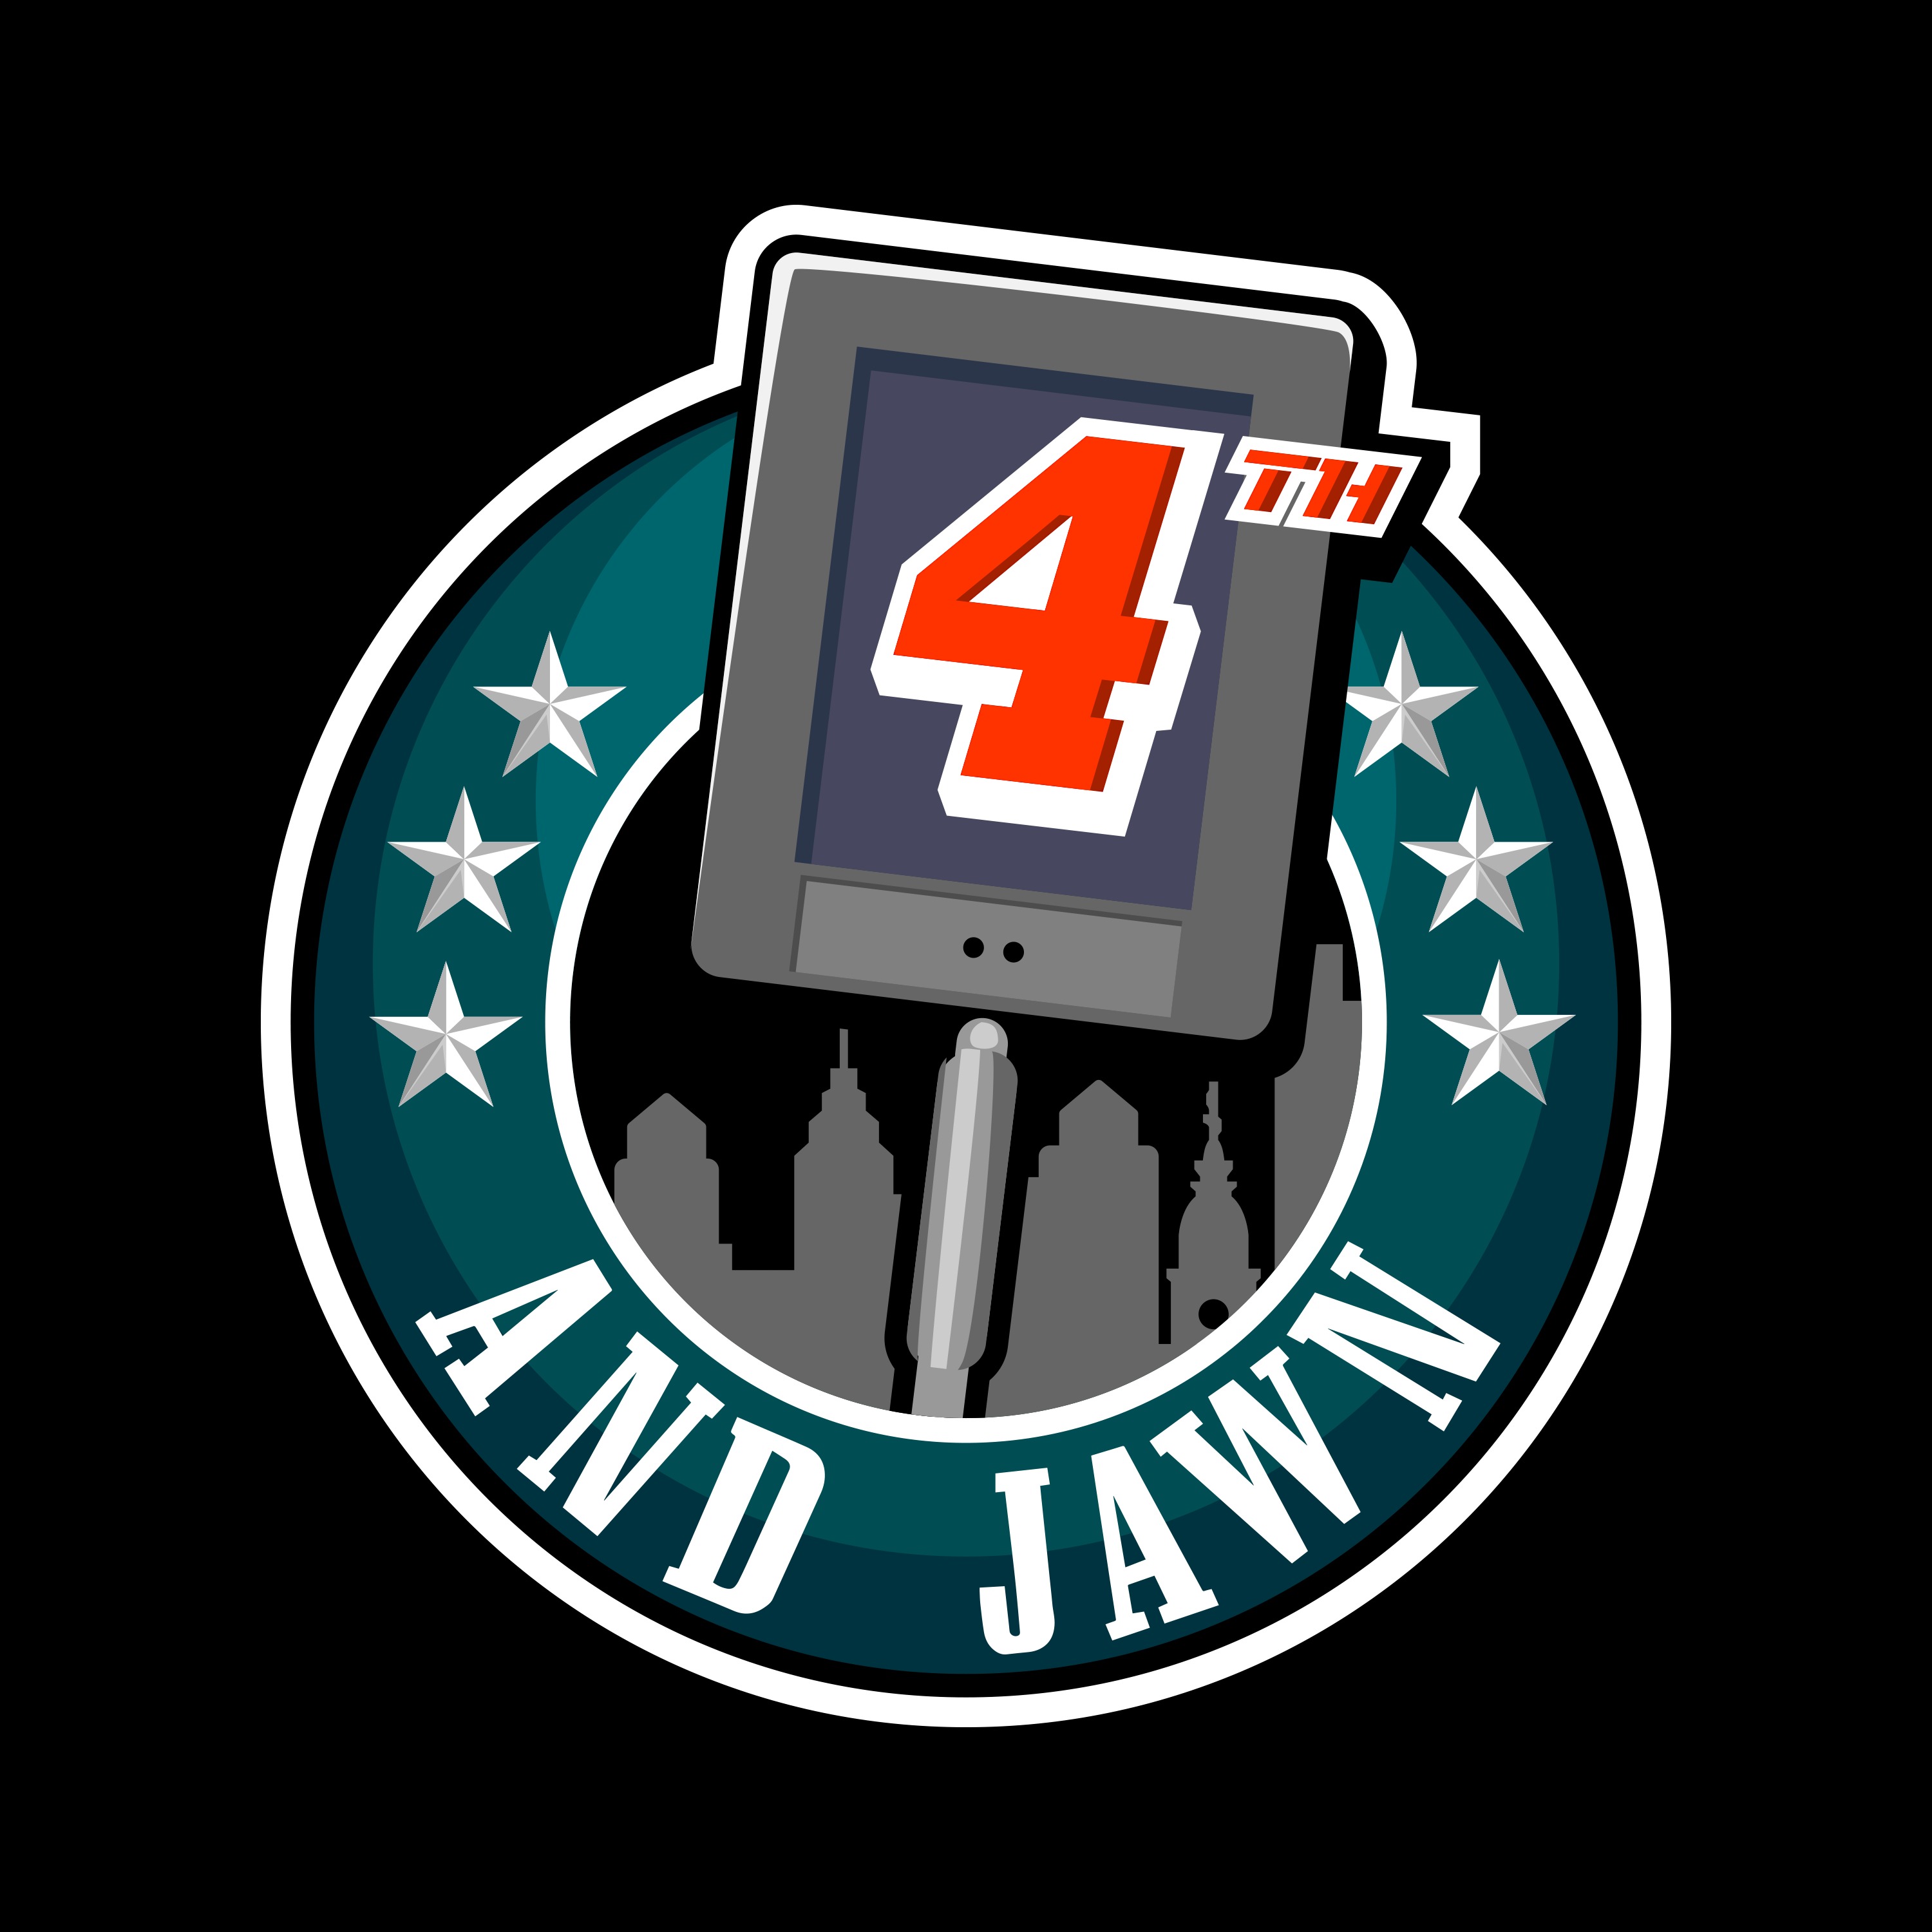 4th and Jawn - Episode 313 Eagles/Texans Recap and the possibility of going undefeated